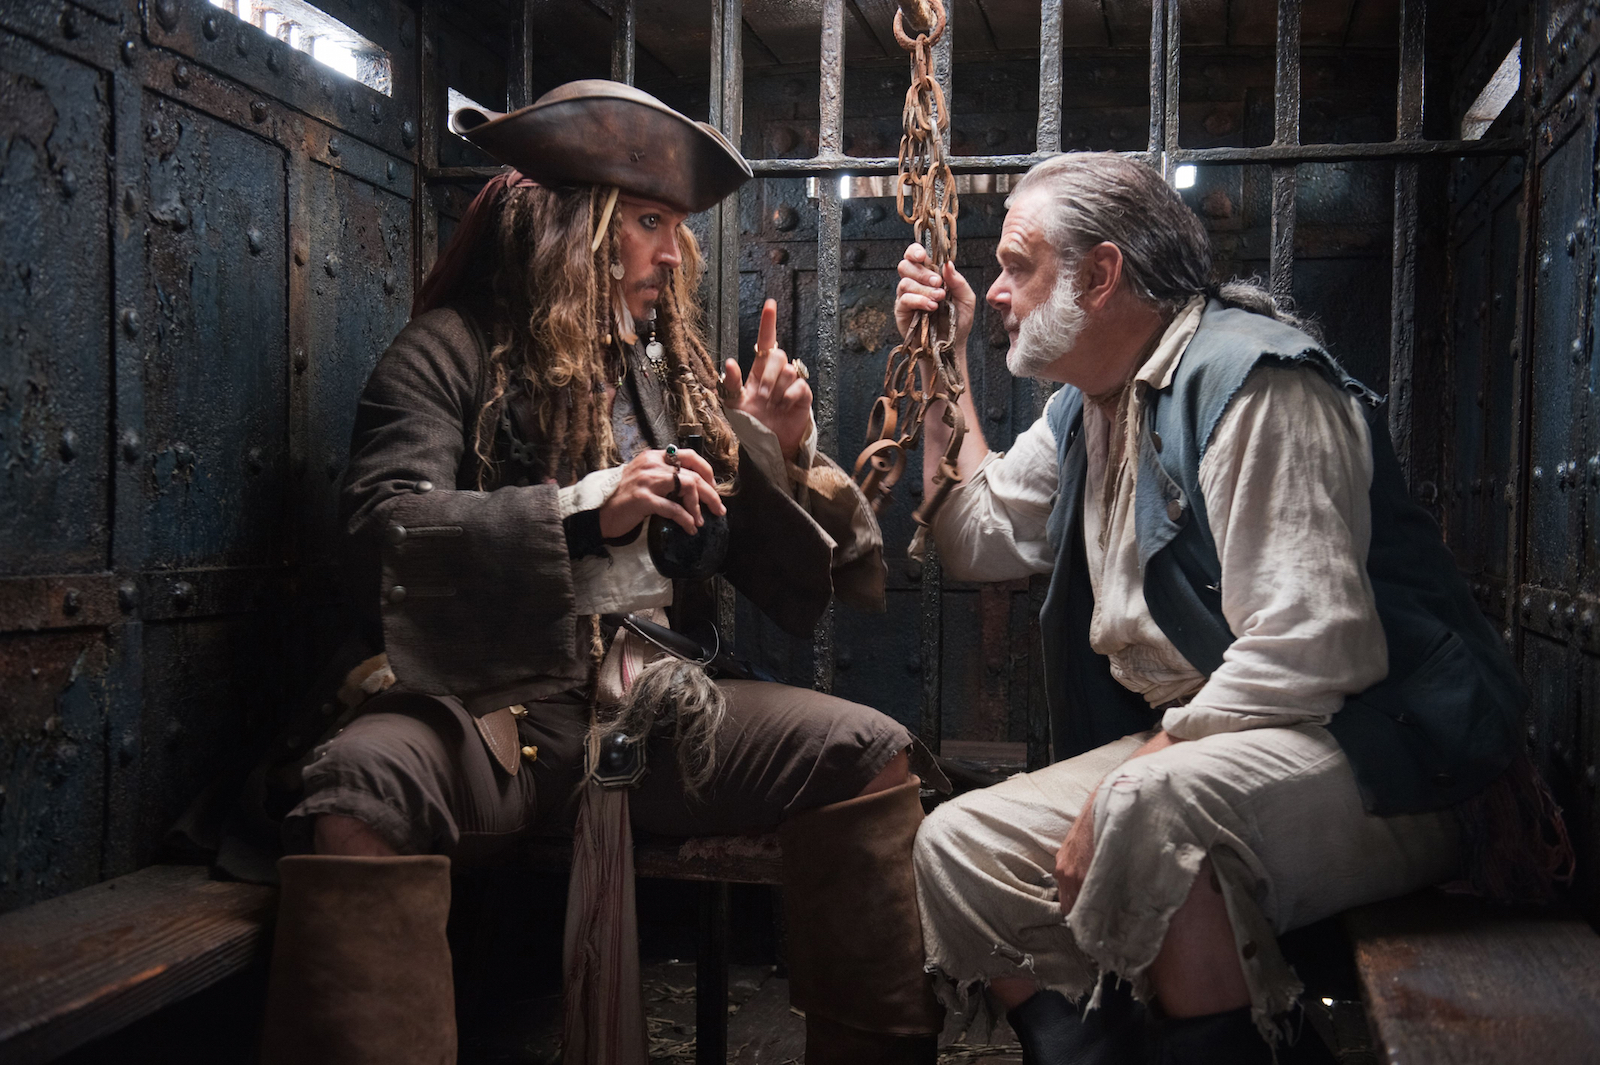 Review: PIRATES OF THE CARIBBEAN: ON STRANGER TIDES